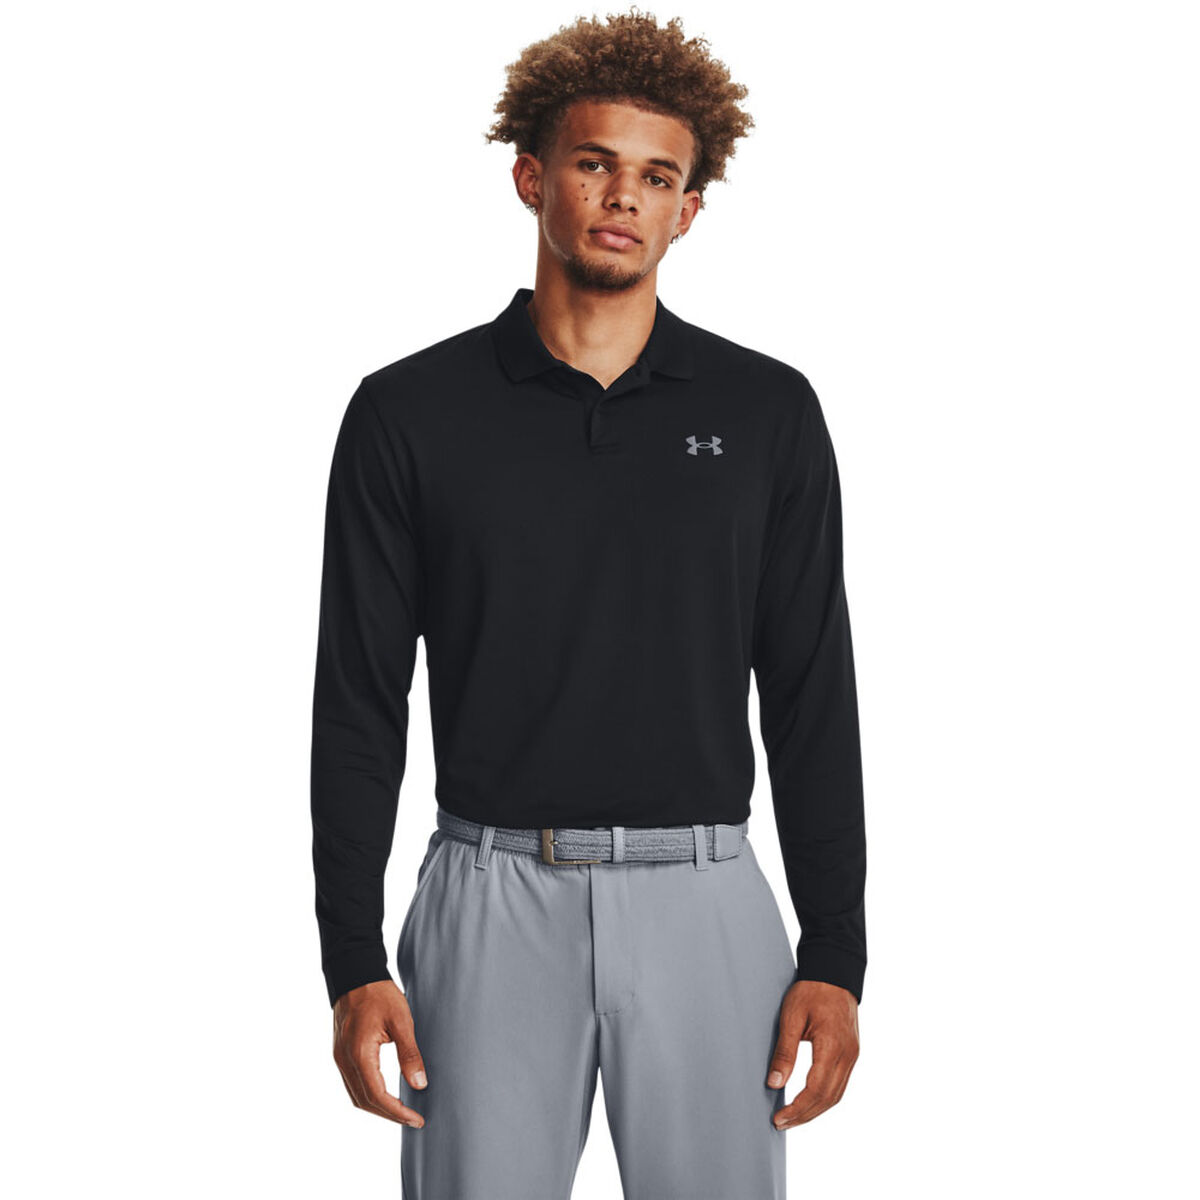 Under Armour Men’s Black and Grey Performance 3.0 Long Sleeve Golf Polo Shirt, Size: XXL | American Golf